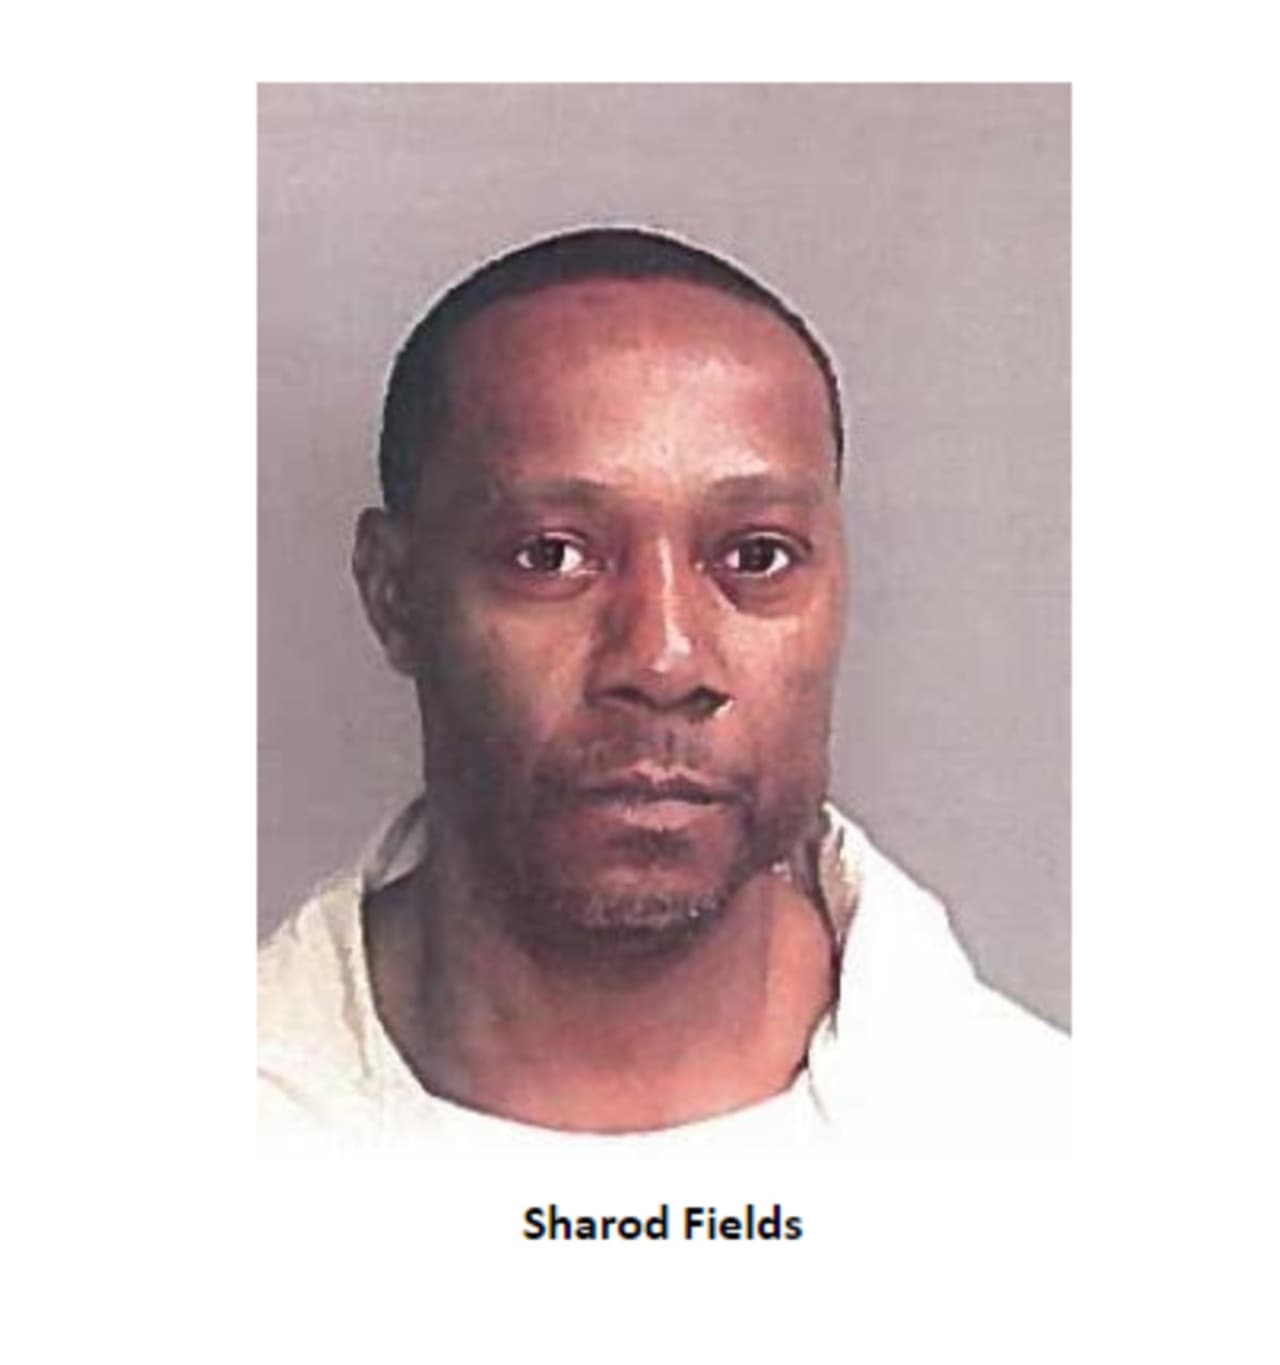 A warrant has been issued for the arrest of Sharod Fields by Newark police.